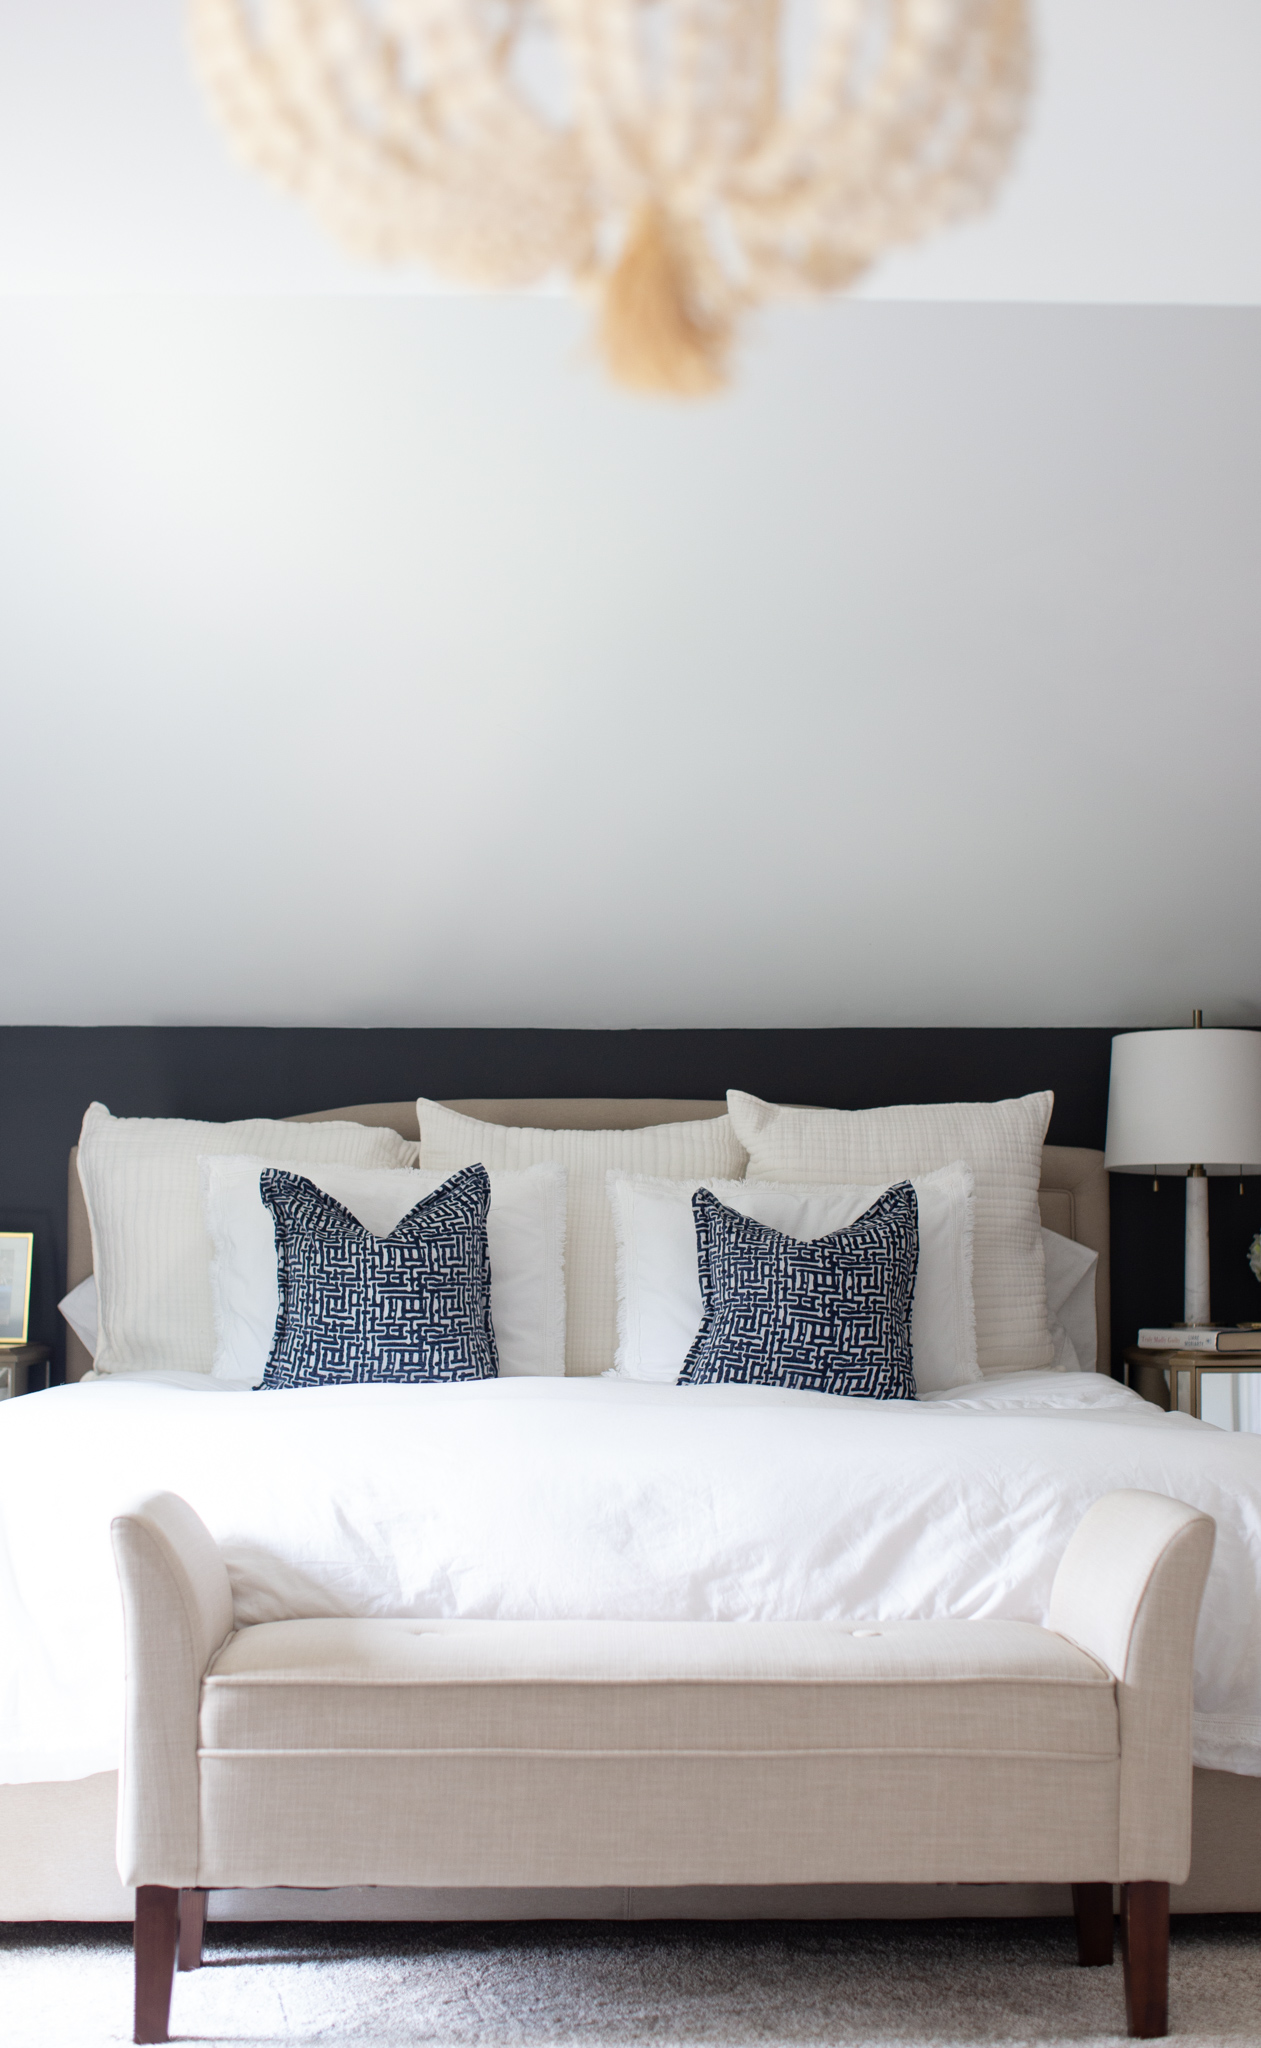 Master Bedroom Remodel Ideas by popular Ohio life and style blog, Coffee Beans and Bobby Pins: image of a master bedroom with a wood bead chandelier, black walls, king size bed with white linens and a cream fabric bench at the foot of the bed.